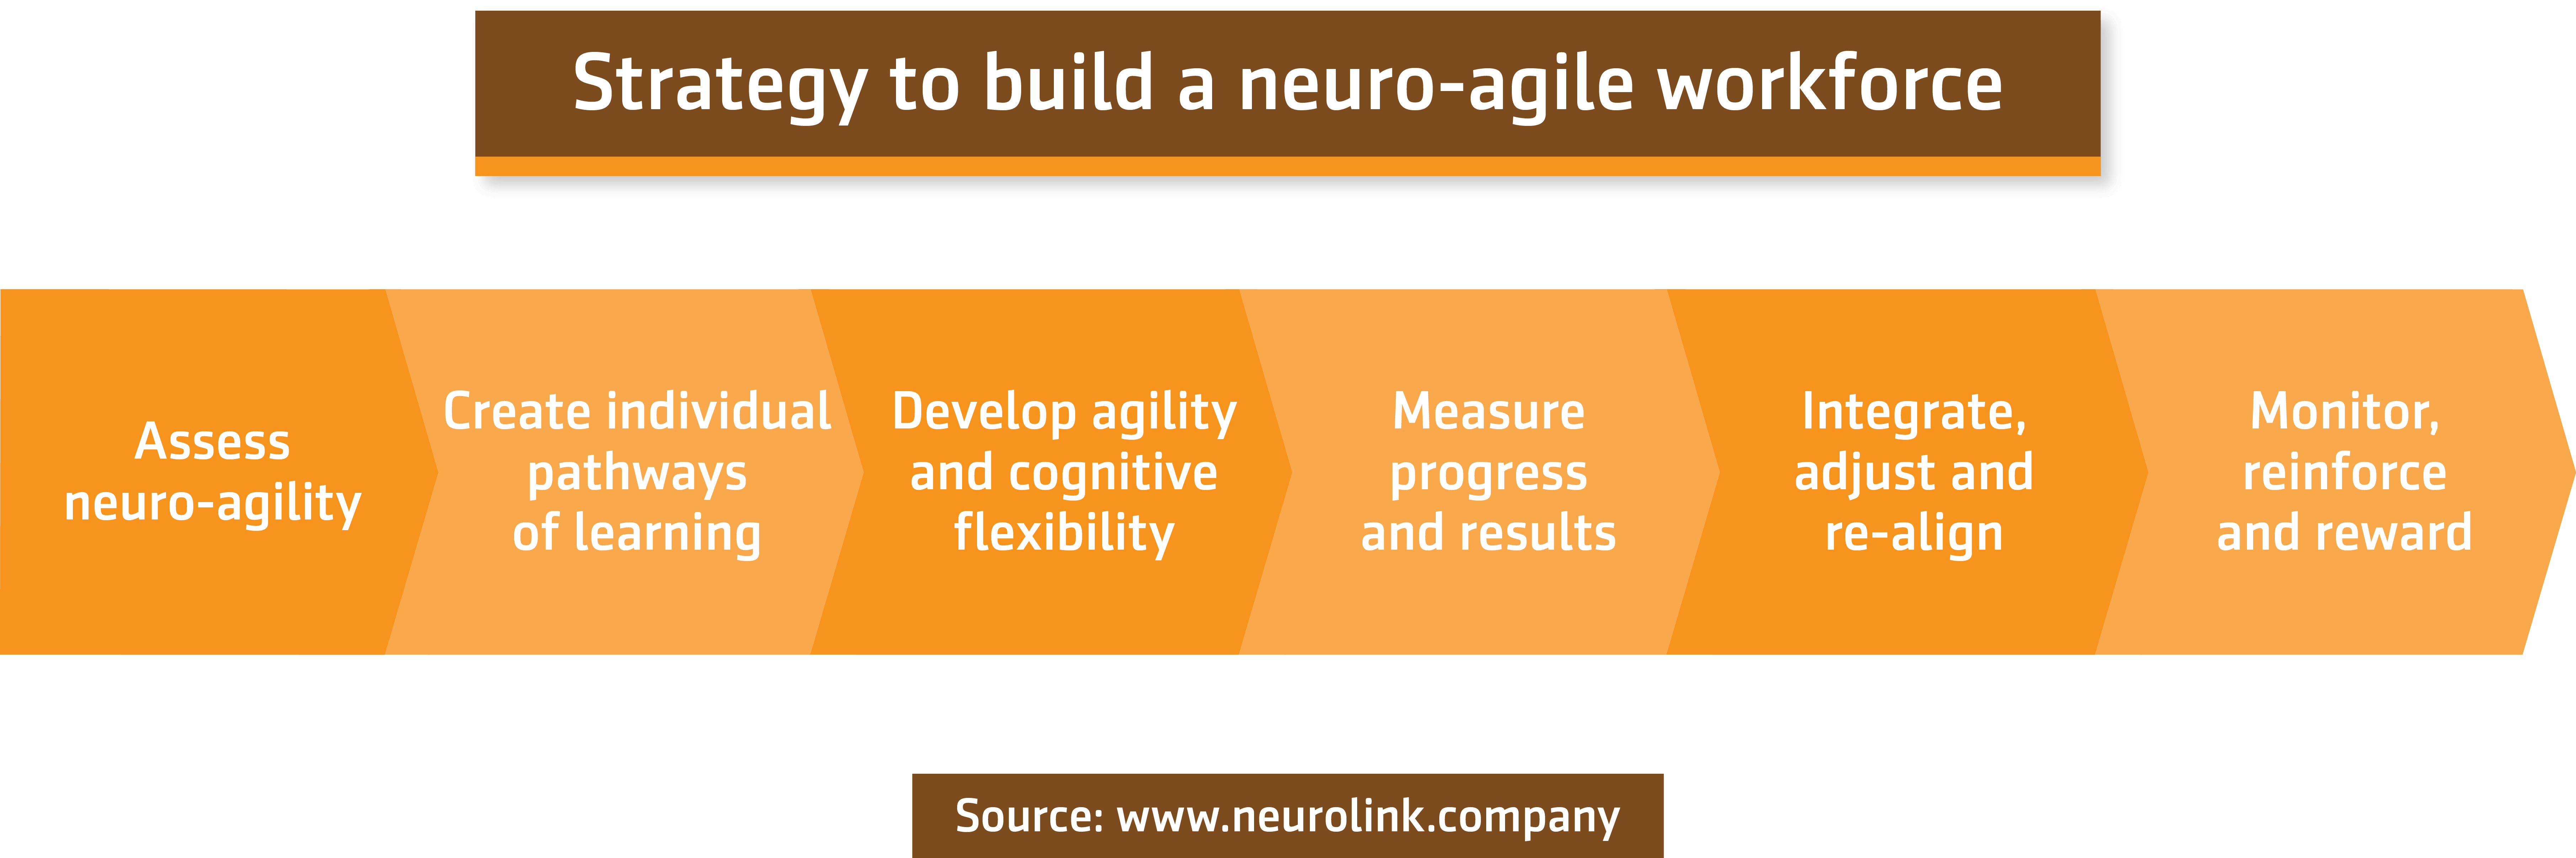 Abstract about the interview about Neuro-agility in practice – ATD Brazil Summit 2019